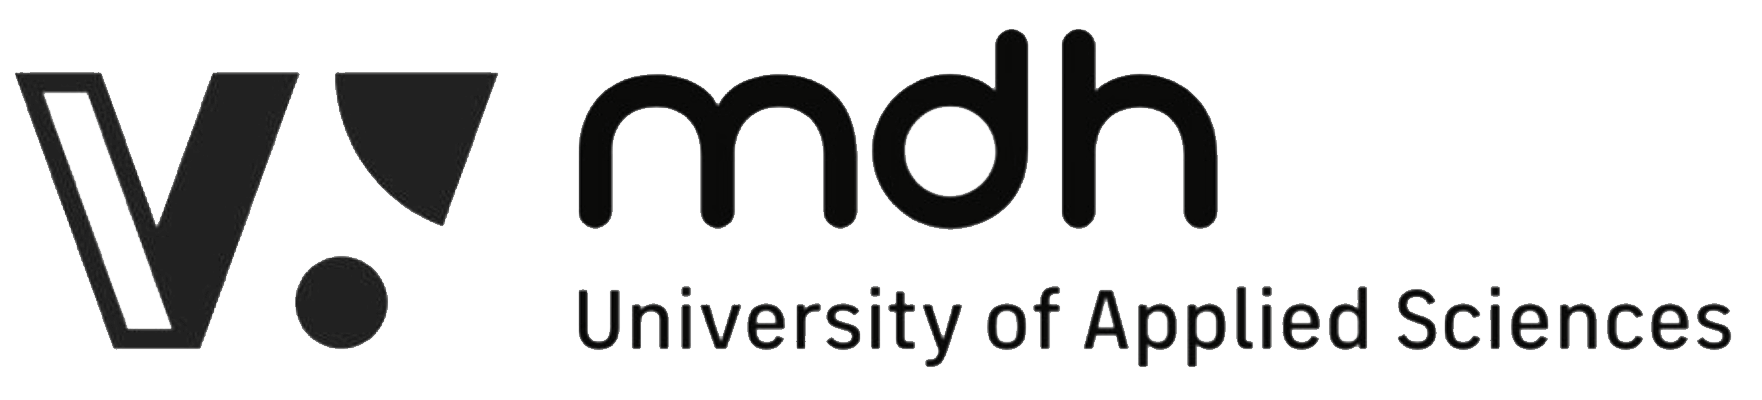 mdh University of Applied Sciences